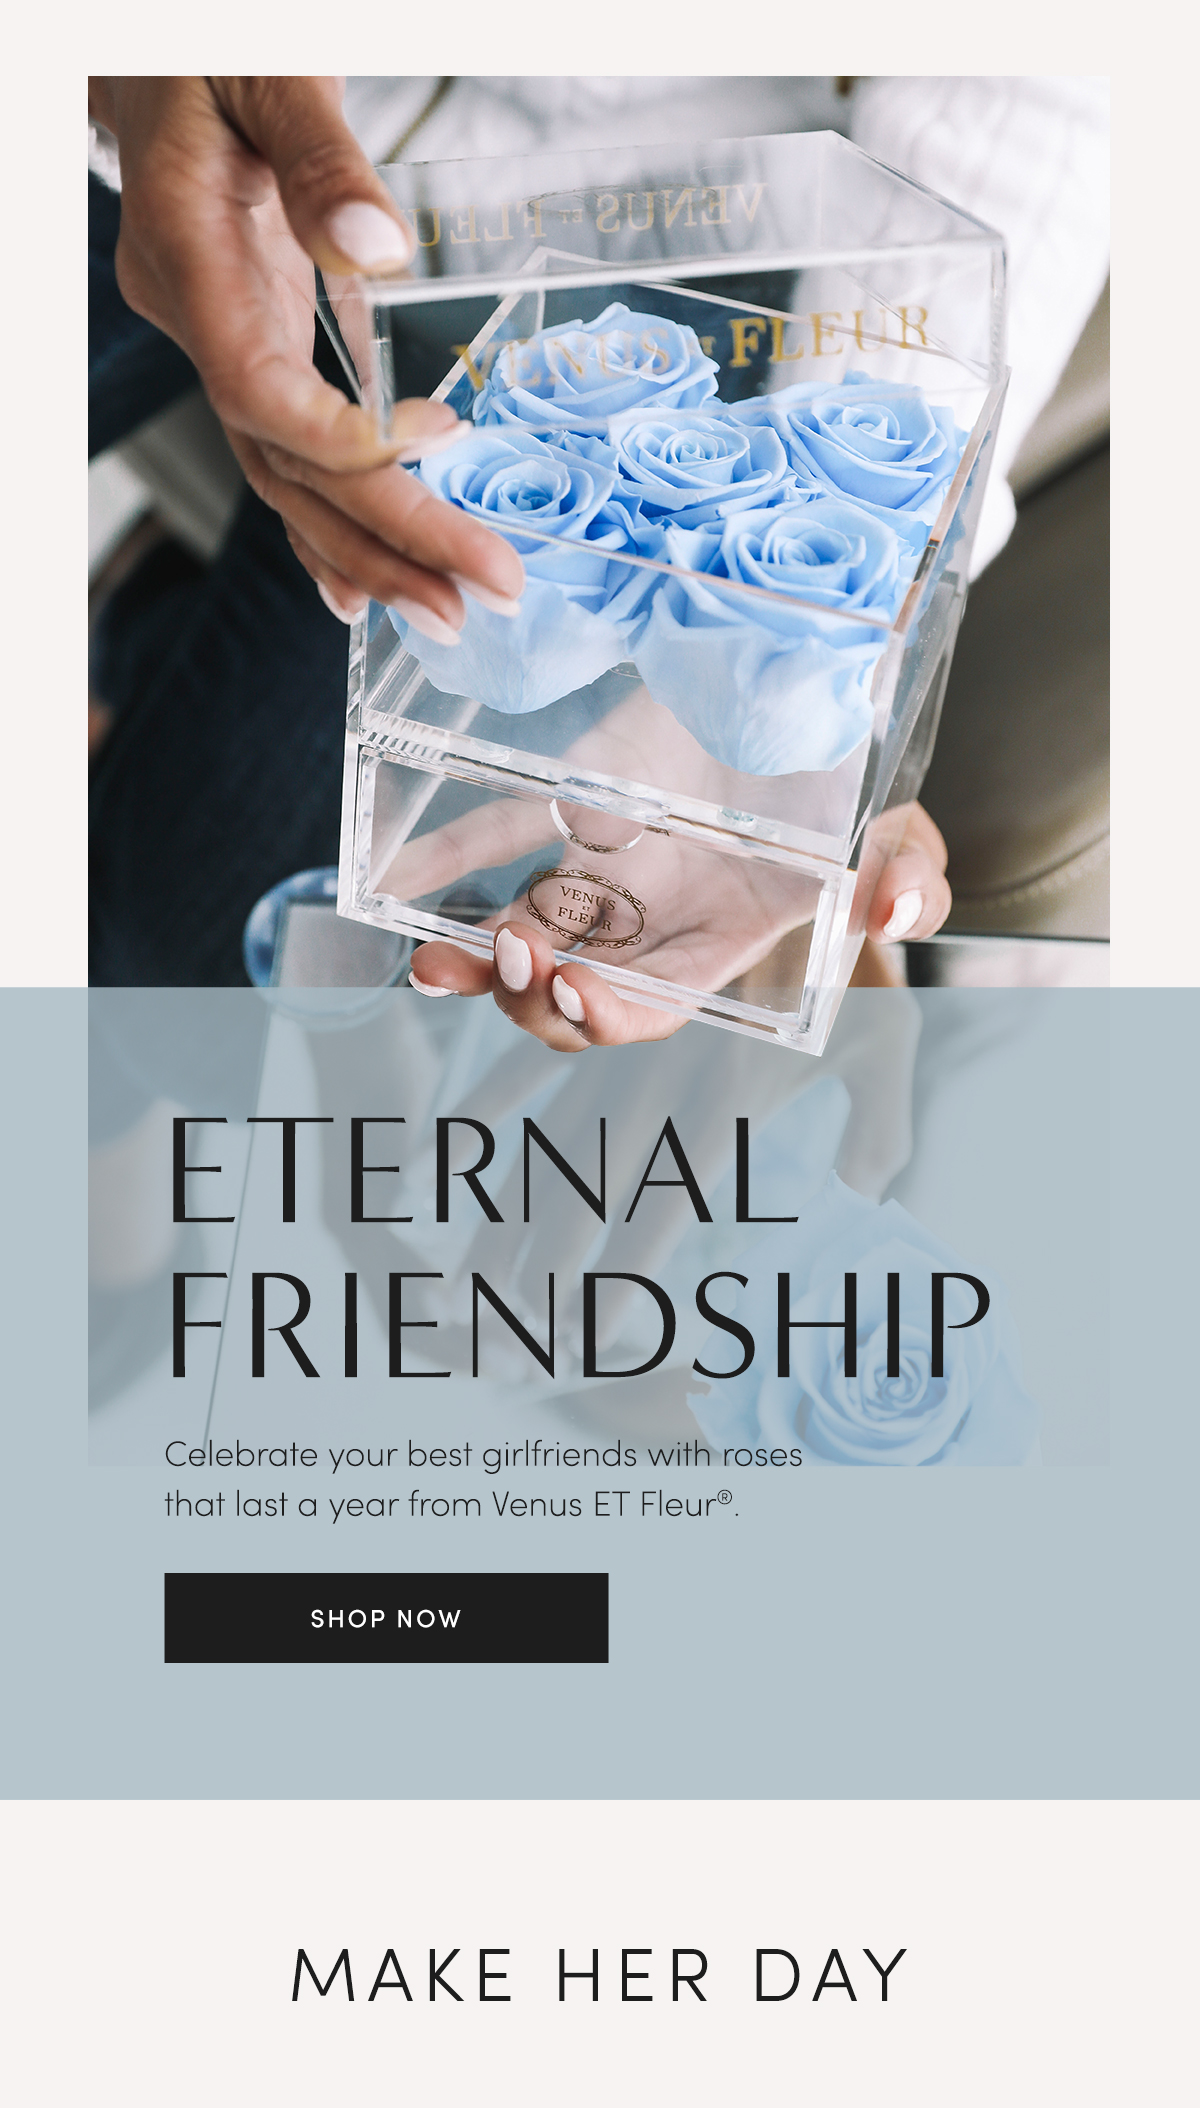 Eternal Friendship | Celebrate your best girlfriends with roses that last a year from Venus ET Fleur?. | SHOP NOW | MAKE HER DAY